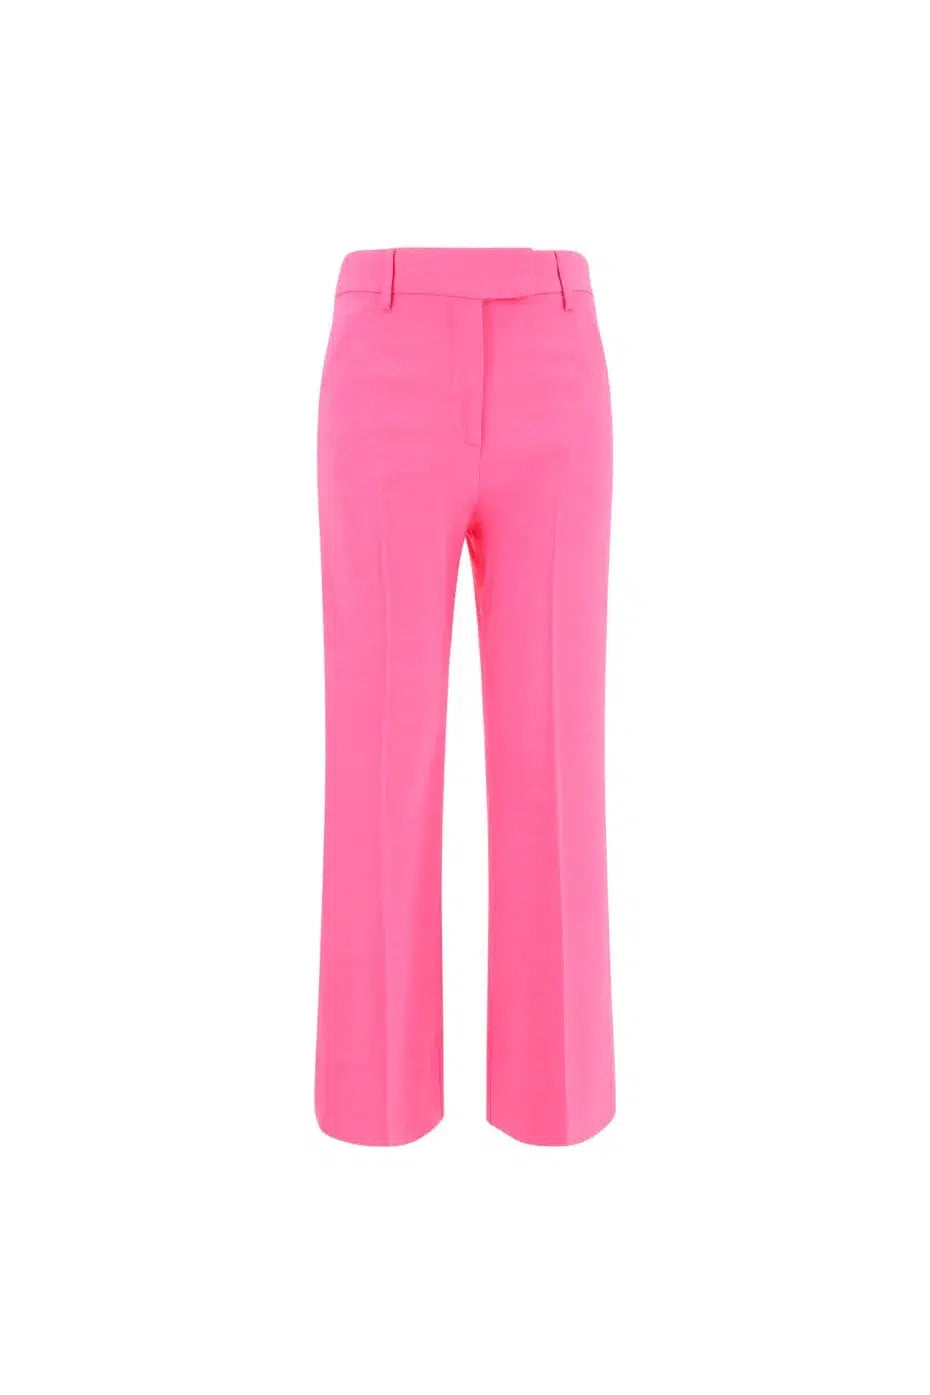 GIADA PANTS CADY STRETCH-Pant-True Royal-Debs Boutique